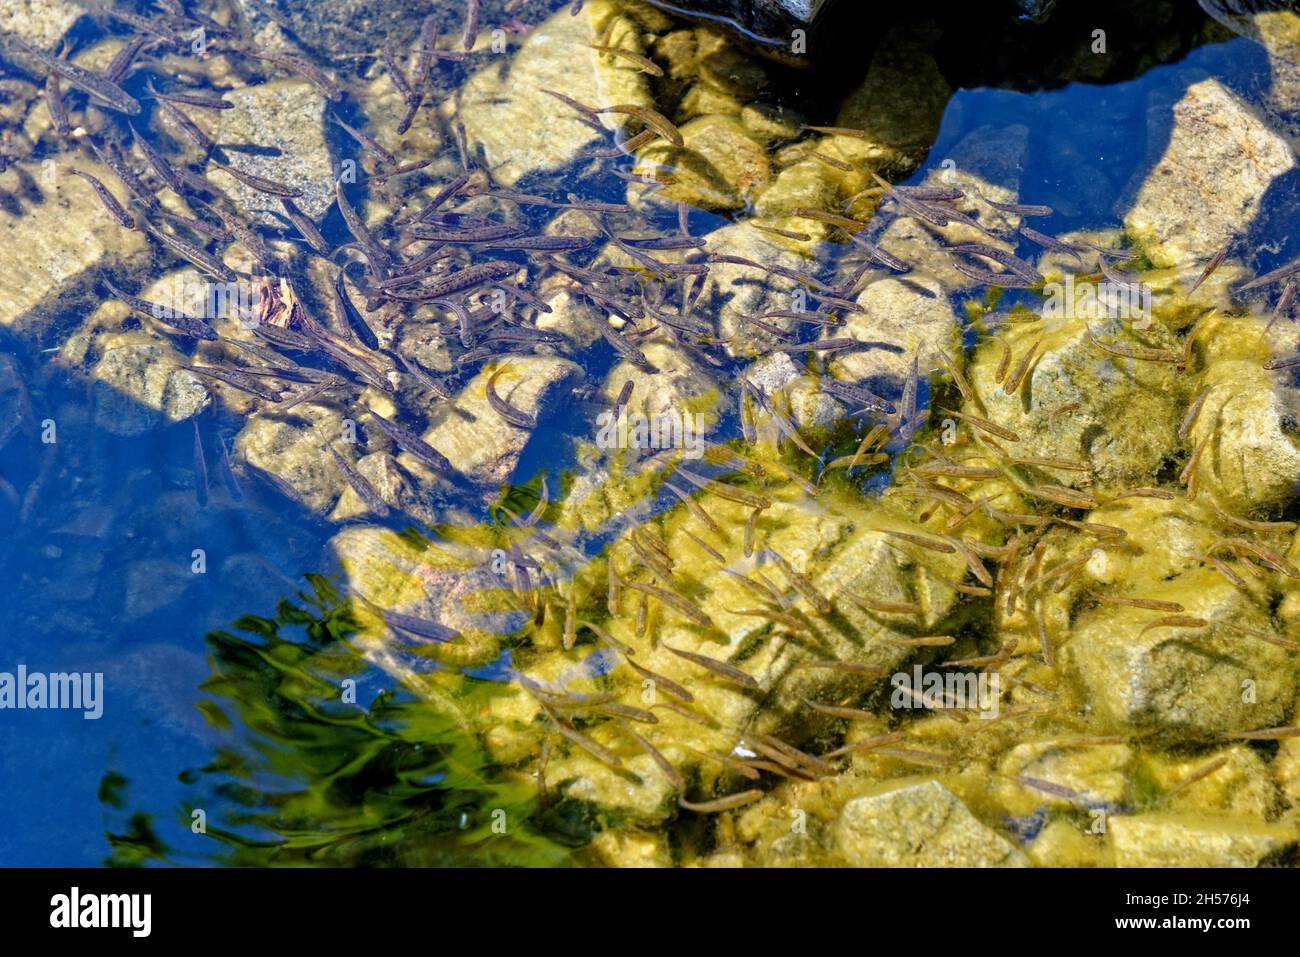 Common minnow in Loch Ness. The Eurasian minnow, minnow, or common minnow (Phoxinus phoxinus) is a small species of freshwater fish in the carp family Stock Photo